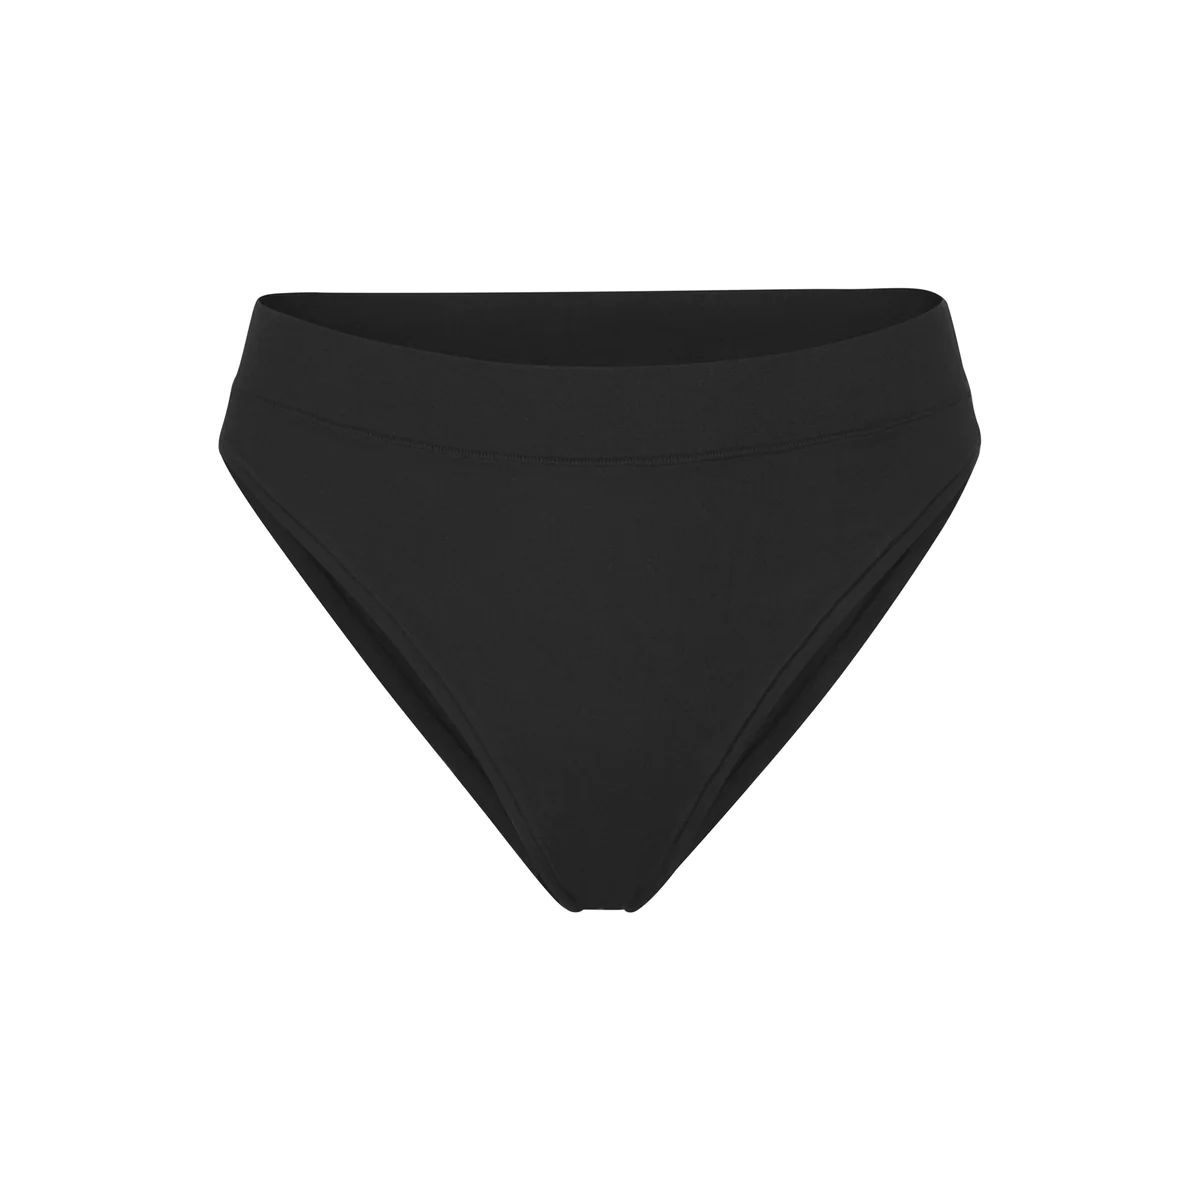 A Brutally Honest Skims Underwear Review From 3 Editors